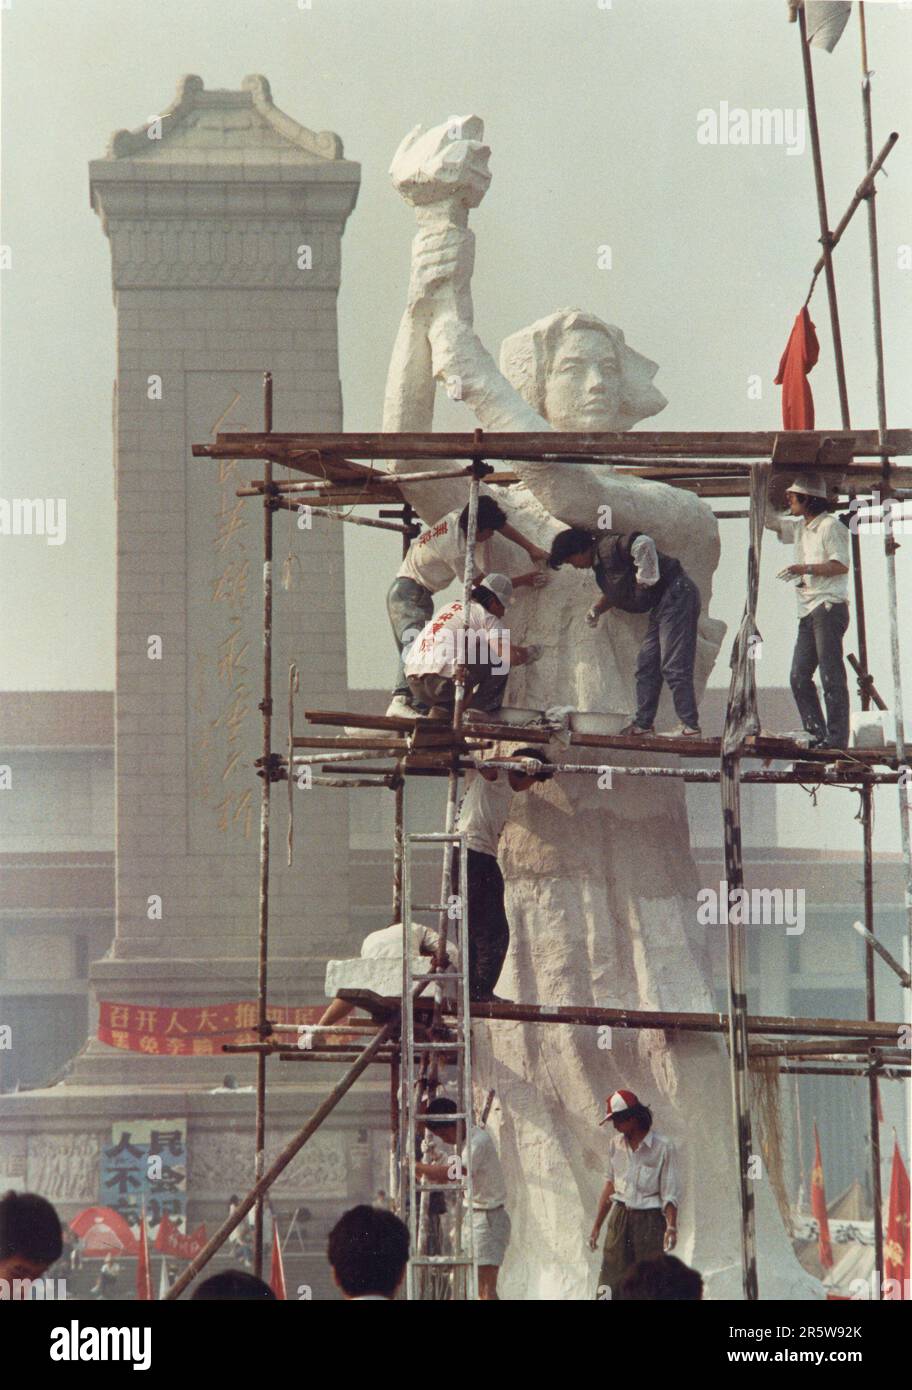 Student artist construct a 'Goddess of Democracy' on Tiananmen Square during protests on May 30, 1989. Stock Photo